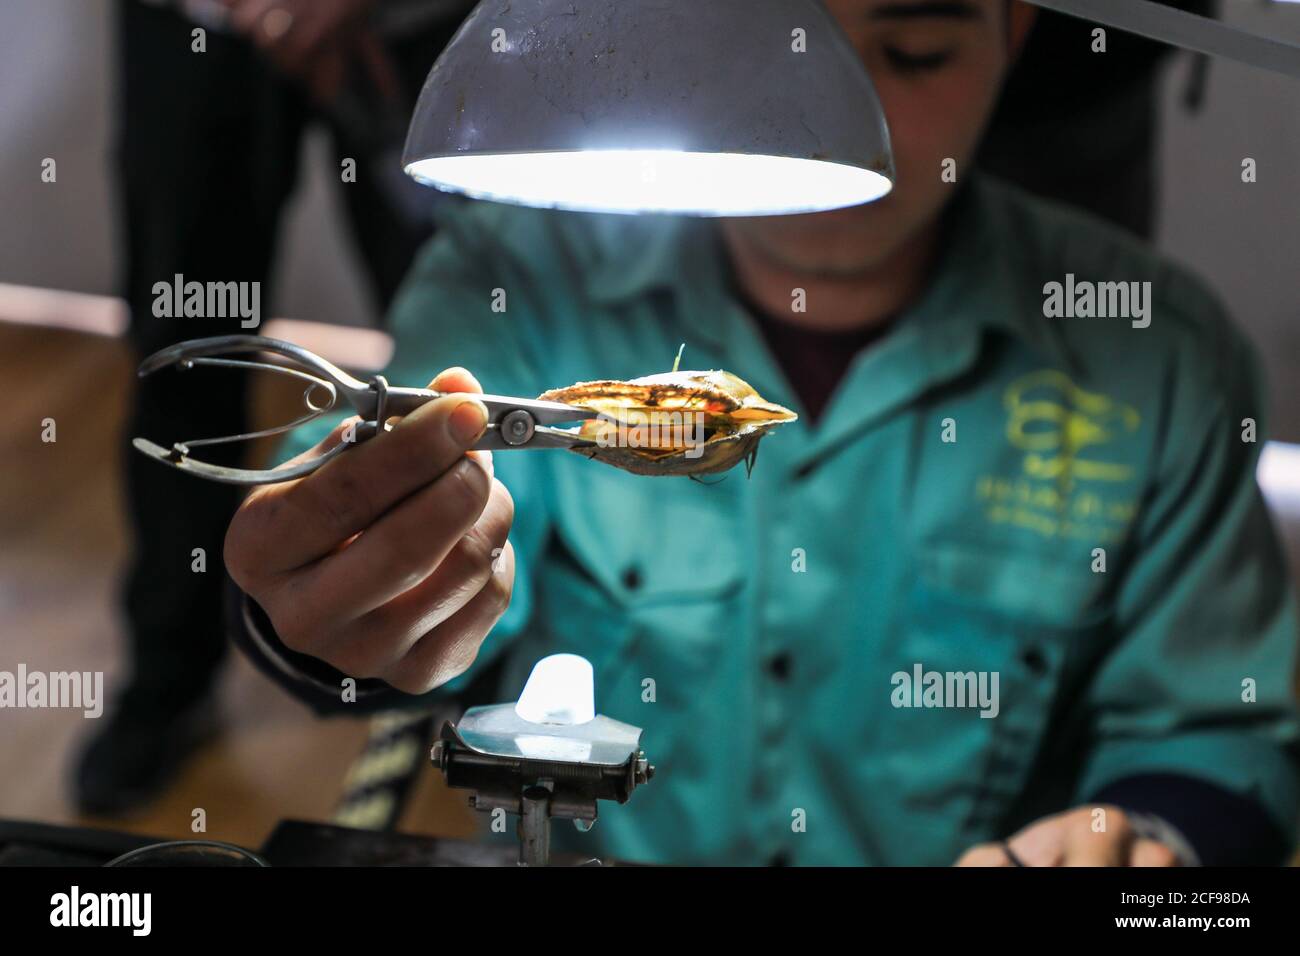 Extracing a pearl from an oyster using a surgical-style instrument at the Halong Bay Pearl Farm, Hạ Long Bay, Vietnam, Asia Stock Photo